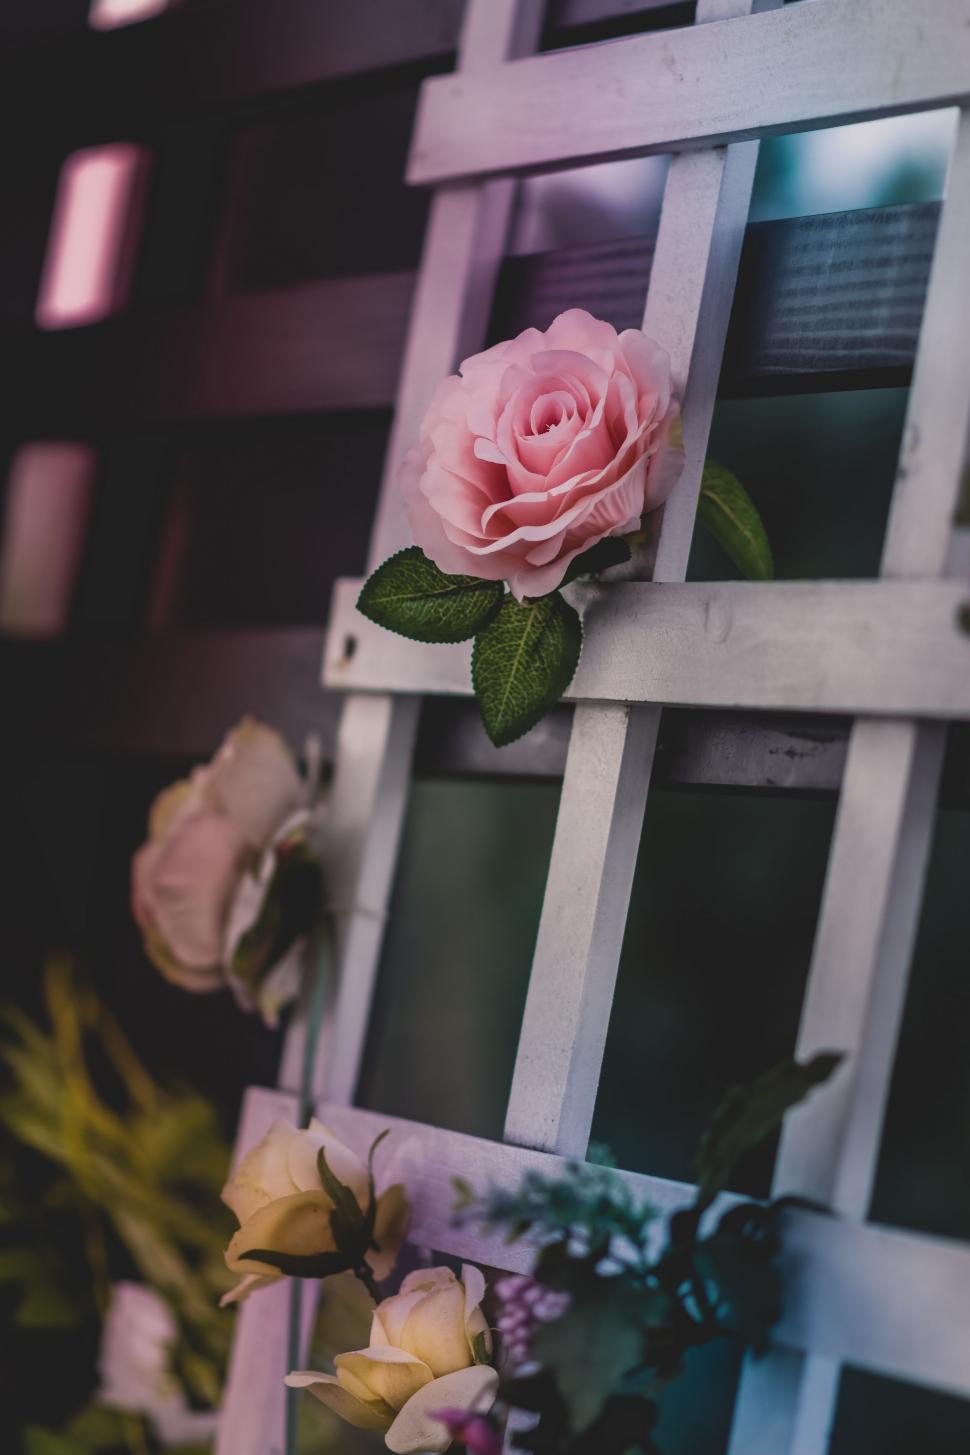 Free Image of Pink Rose on Window Sill 